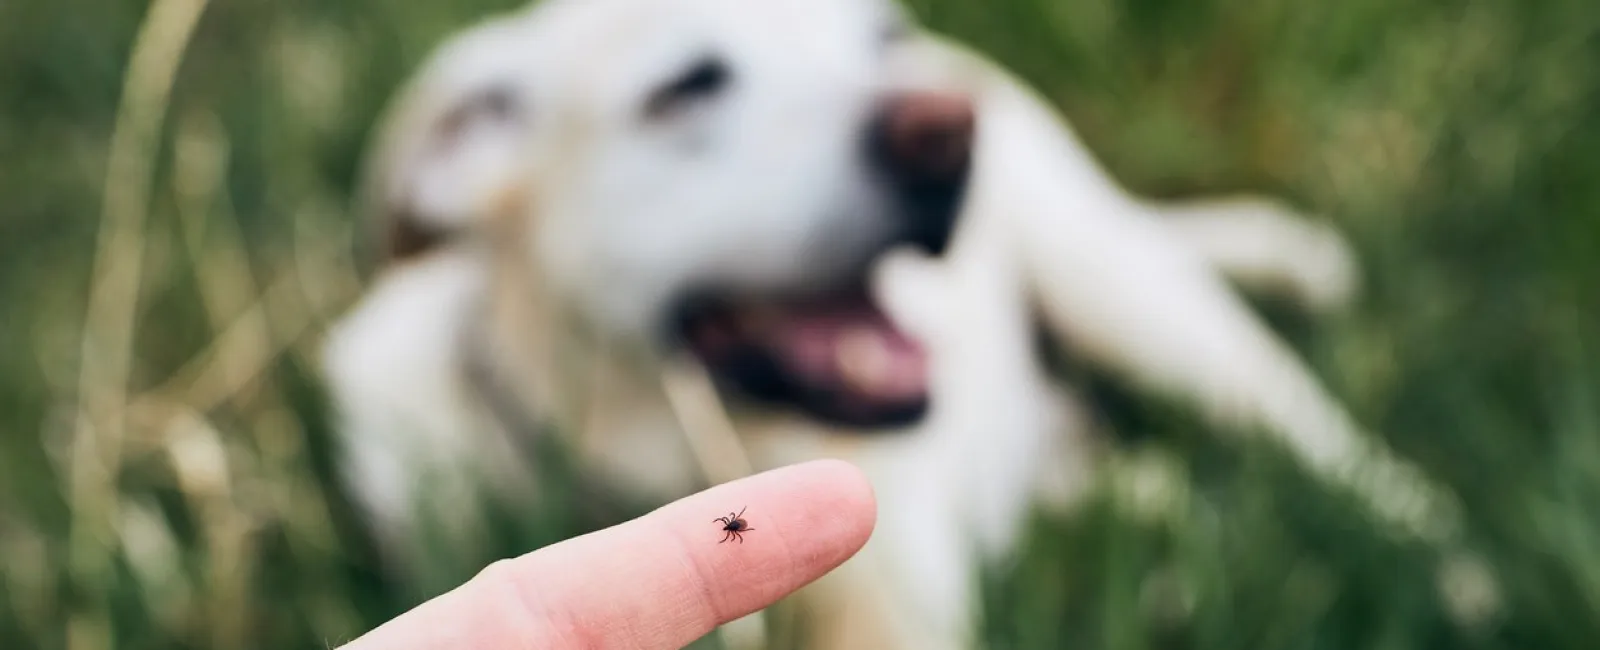 a hand holding a small white dog